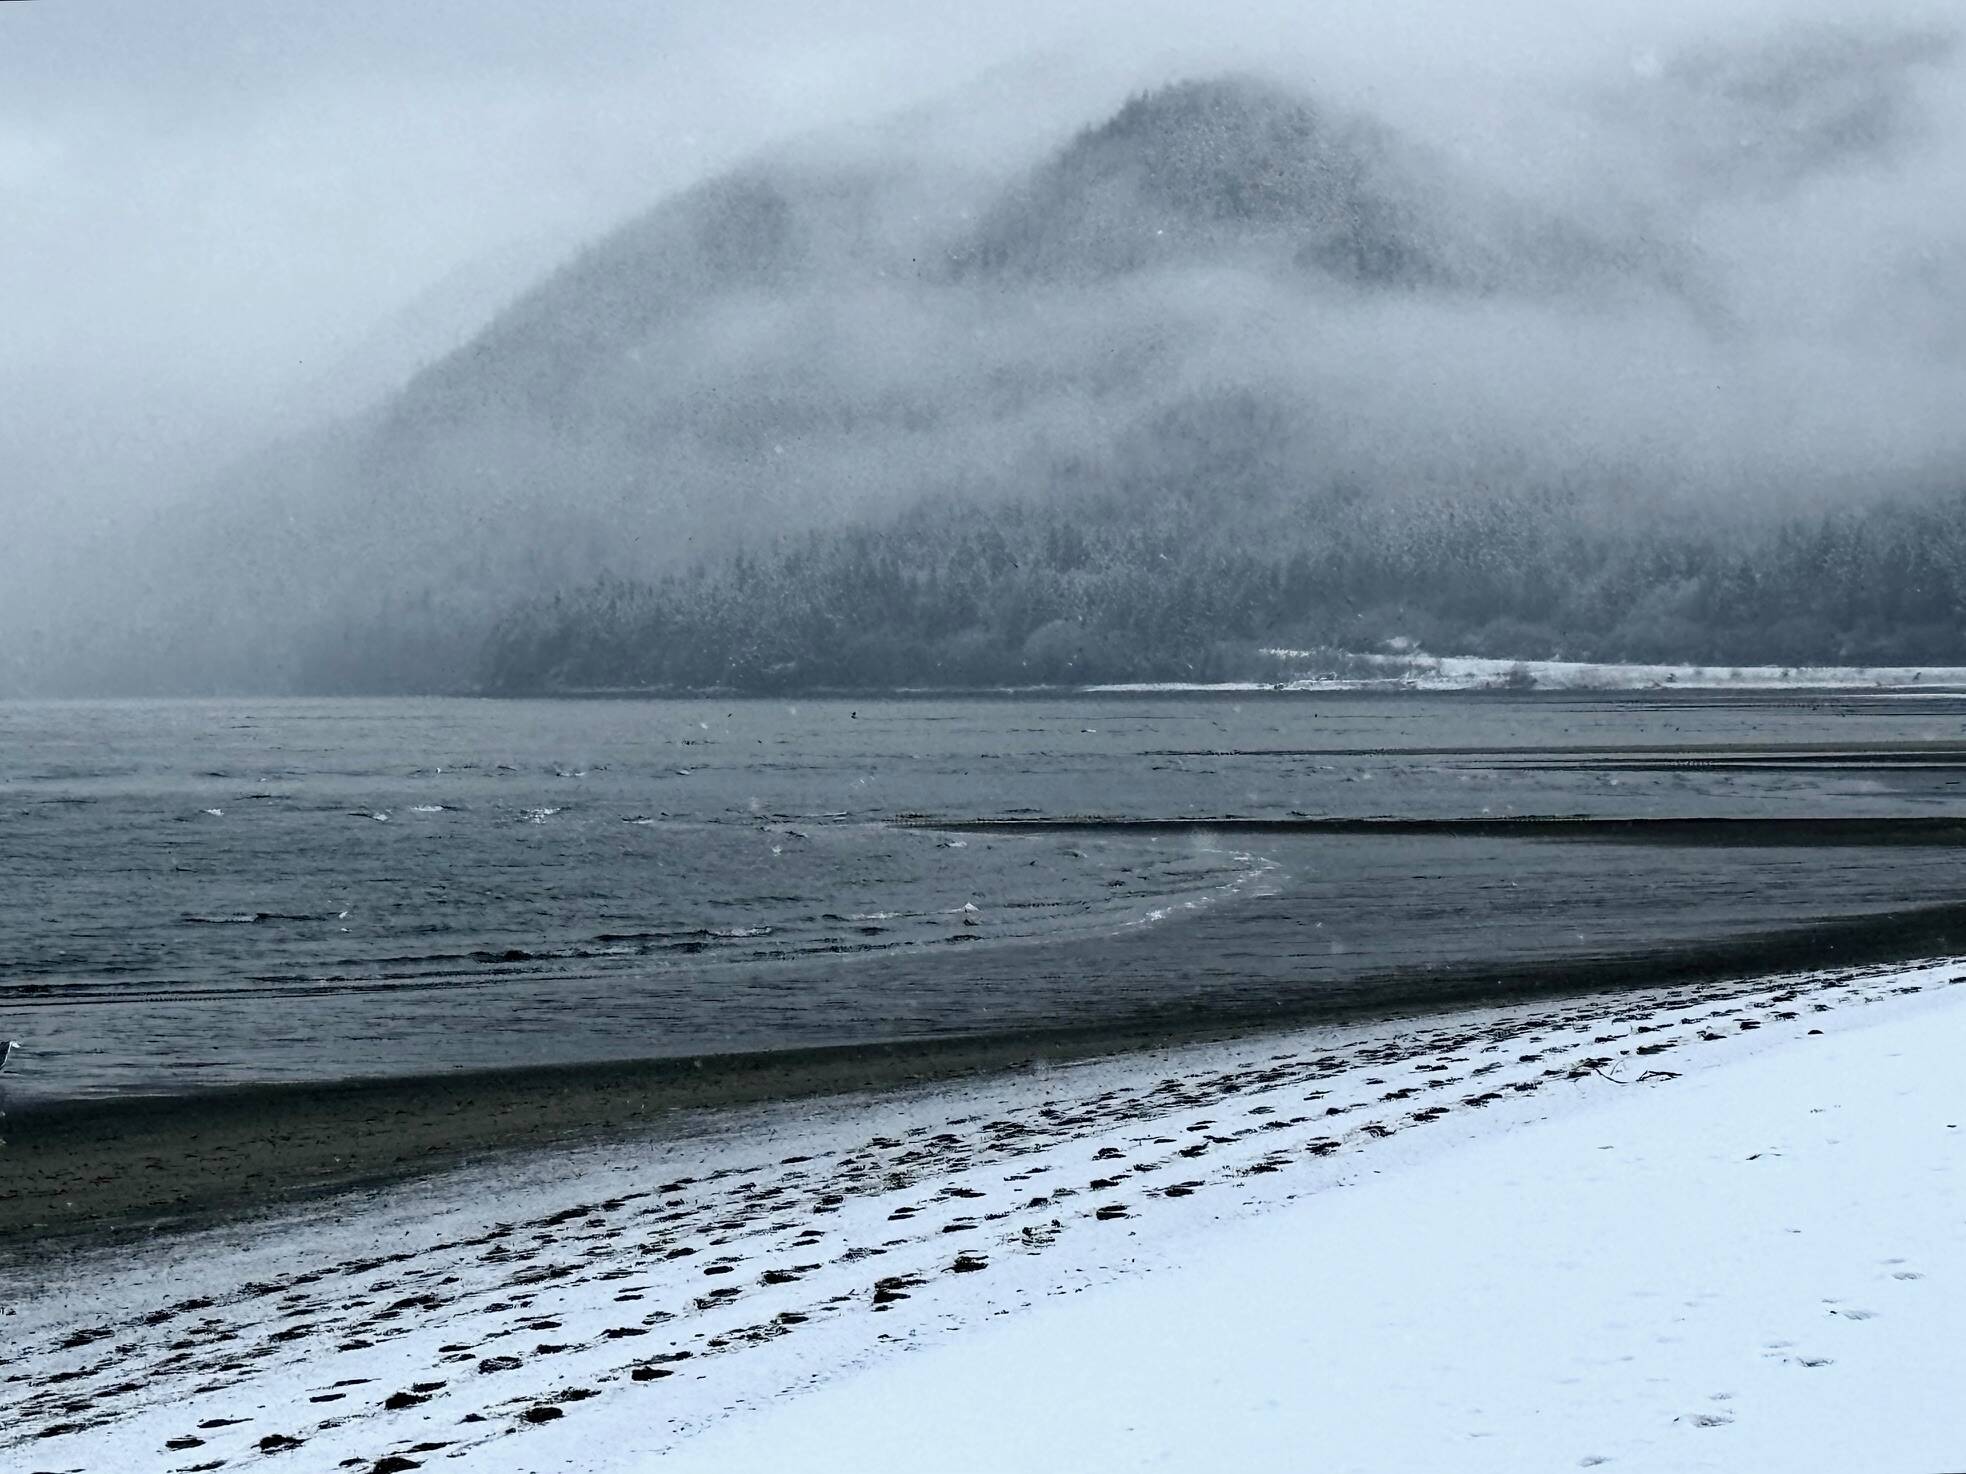 Snowflakes, clouds and footprints greet visitors on New Year’s Day at the Boy Scout Beach Trail. (Photo by Denise Carroll)